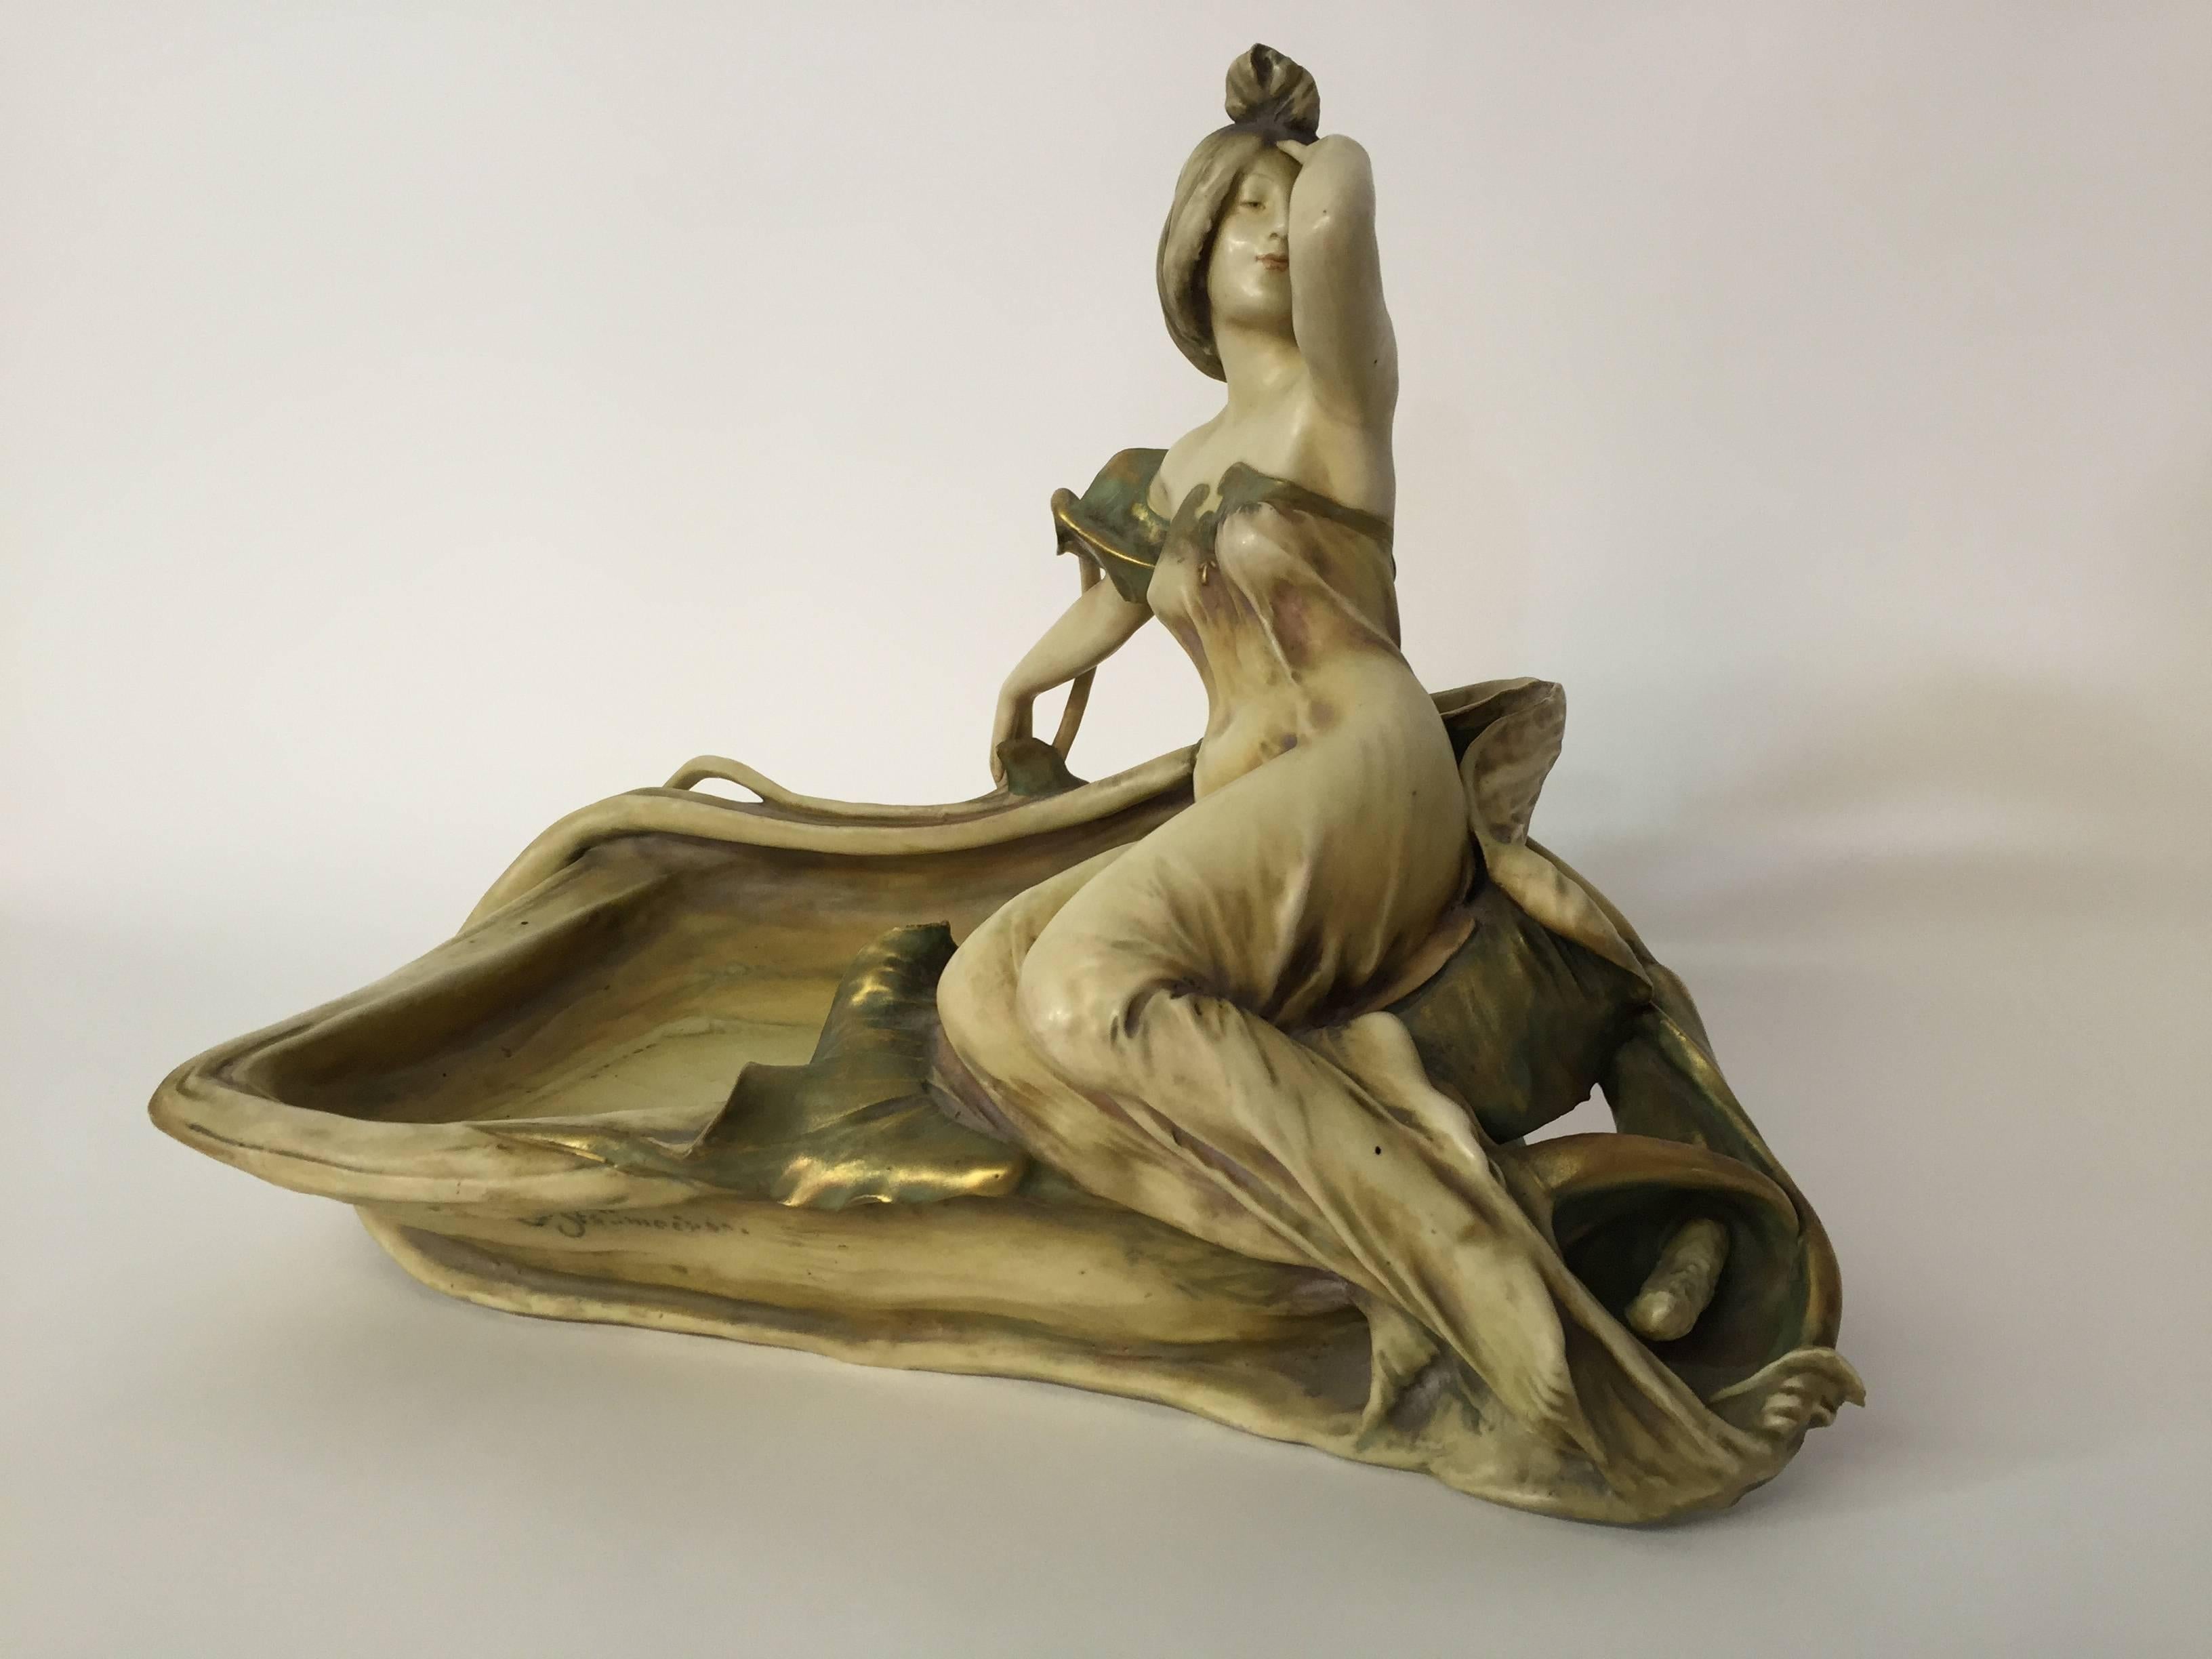 Signed Eduard Stellmacher Art Nouveau pottery centerpiece for Riessner, Stellmacher and Kessel, Turn-Teplitz, Bohemia. Made in Austria, circa 1890-1910. 

Undulating, dramatic and exceptional figure of a reclining lady resting on a lily. Glazed in